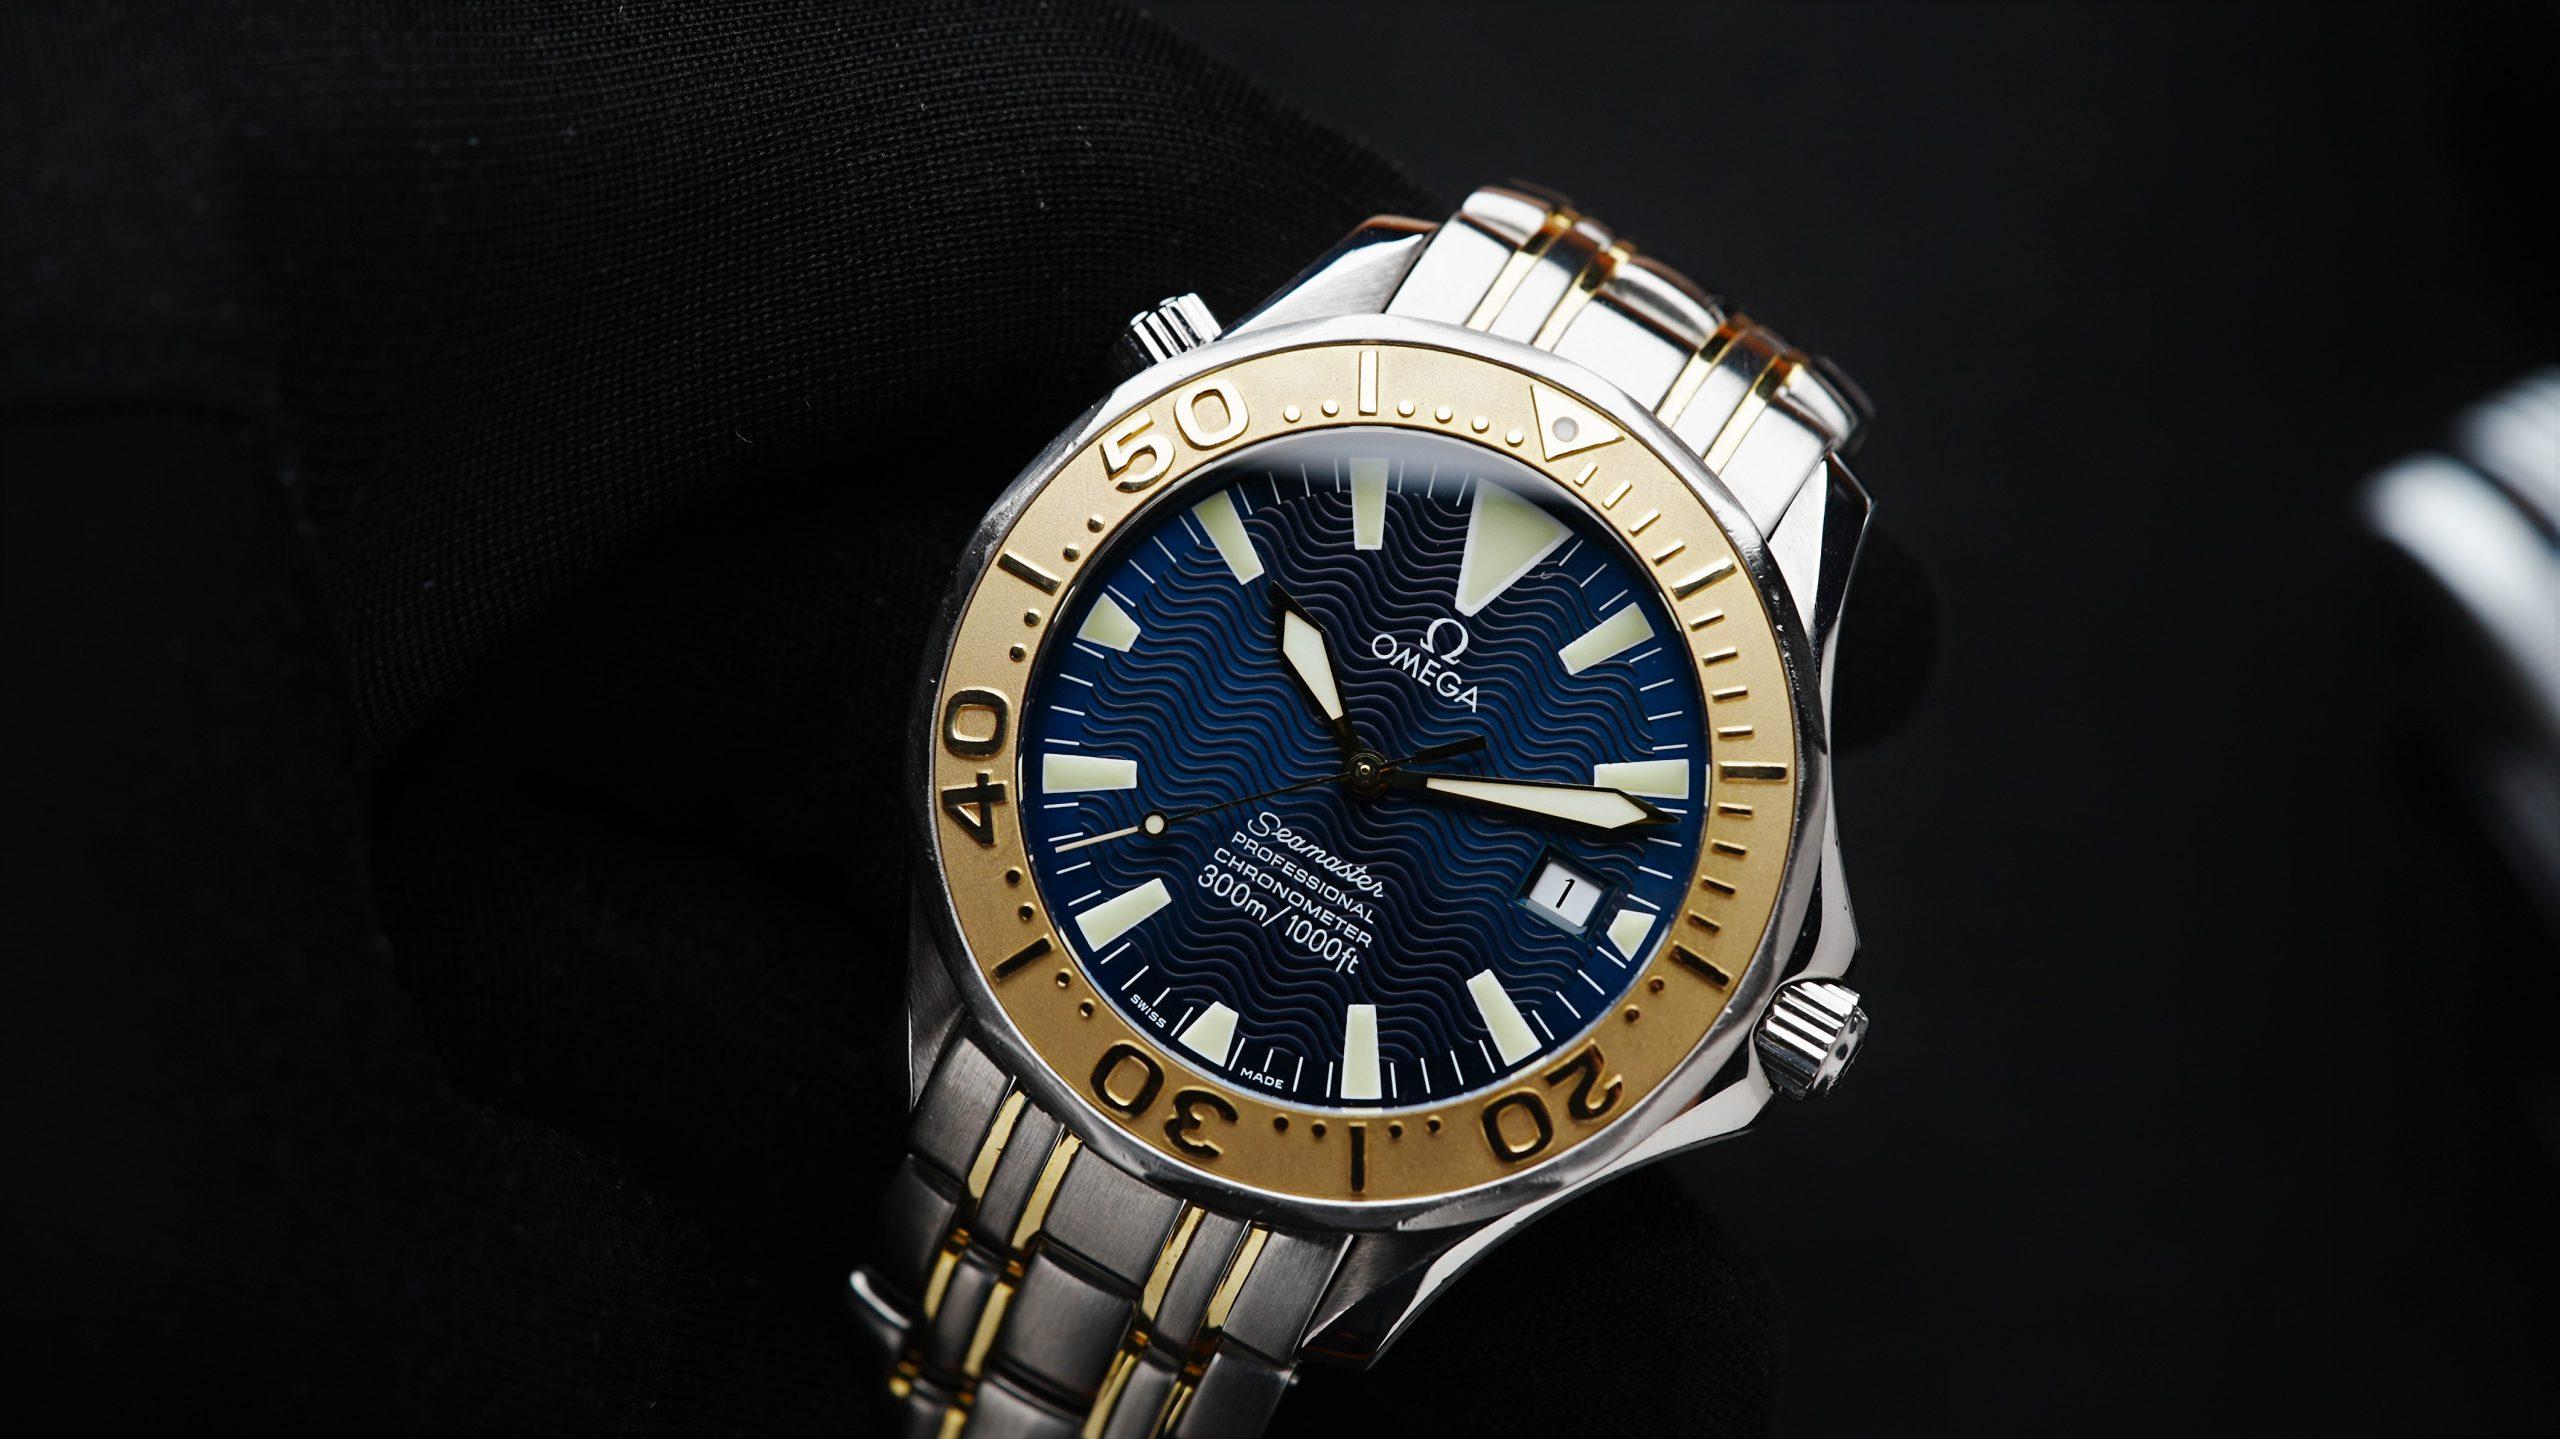 Up close picture of the Omega Seamaster Sword Hands Gold & Steel Blue Dial Rare.